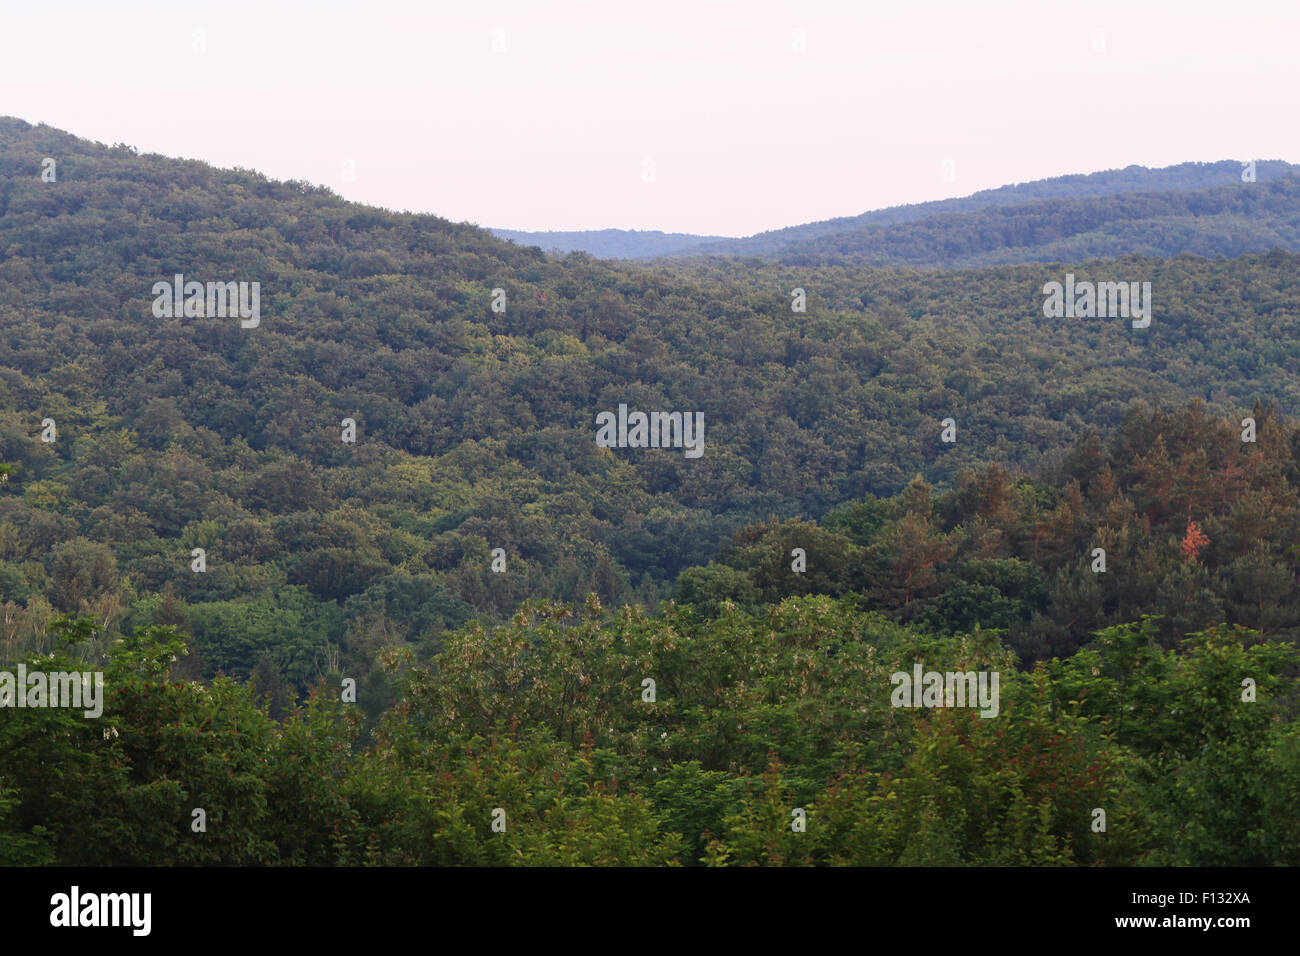 The immense Bükk National Park at dawn. The park consists of more than 430 square kilometers of forested hills Stock Photo